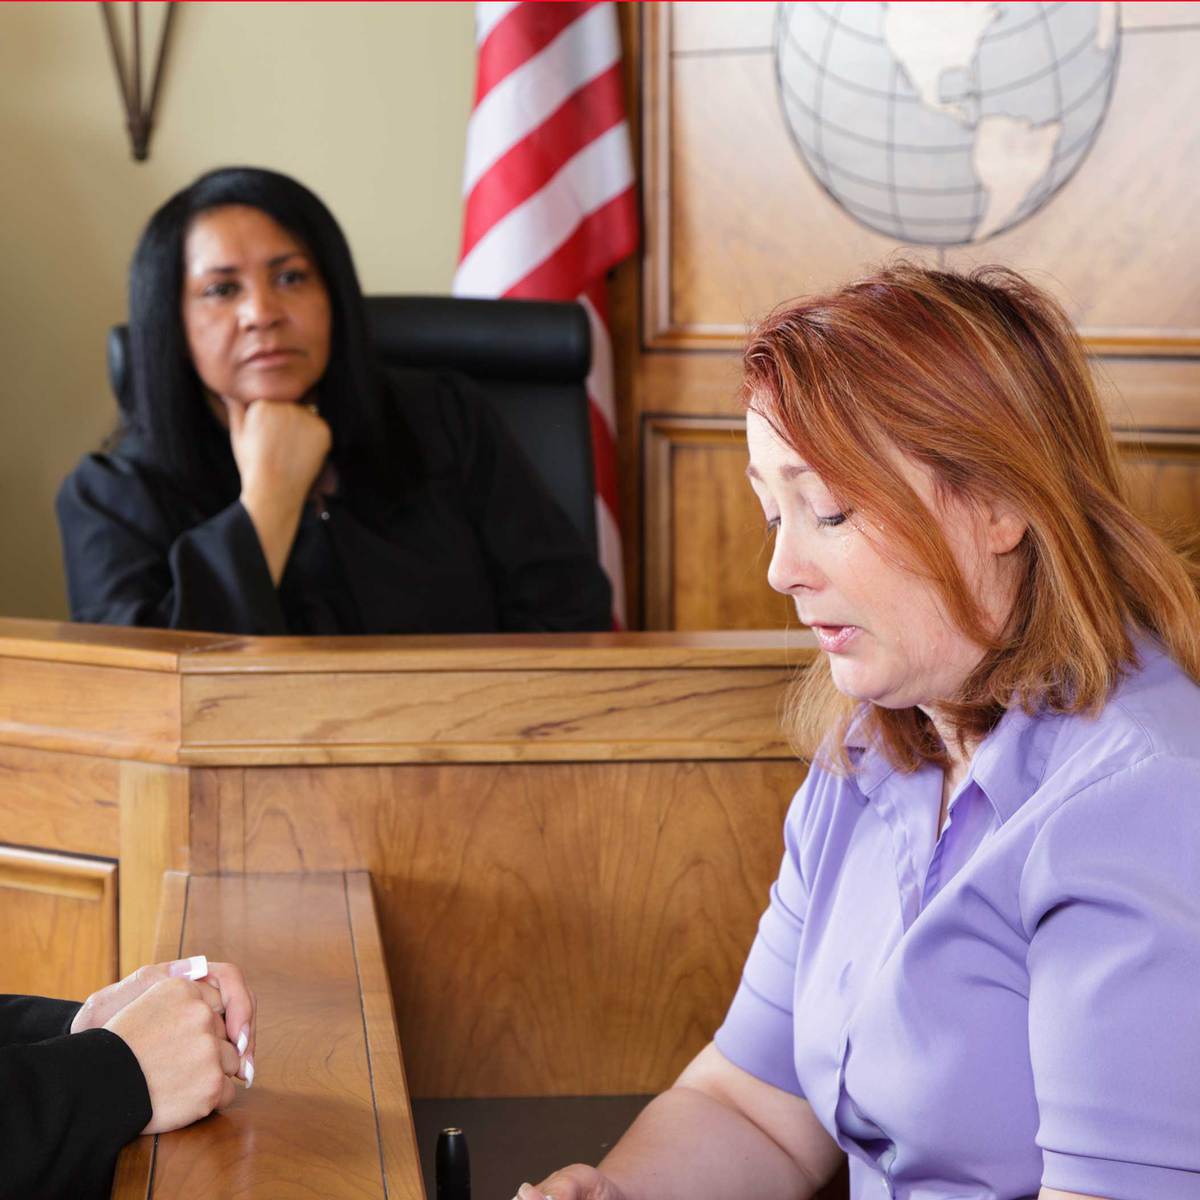 Five Steps to an Effective Cross-Examination